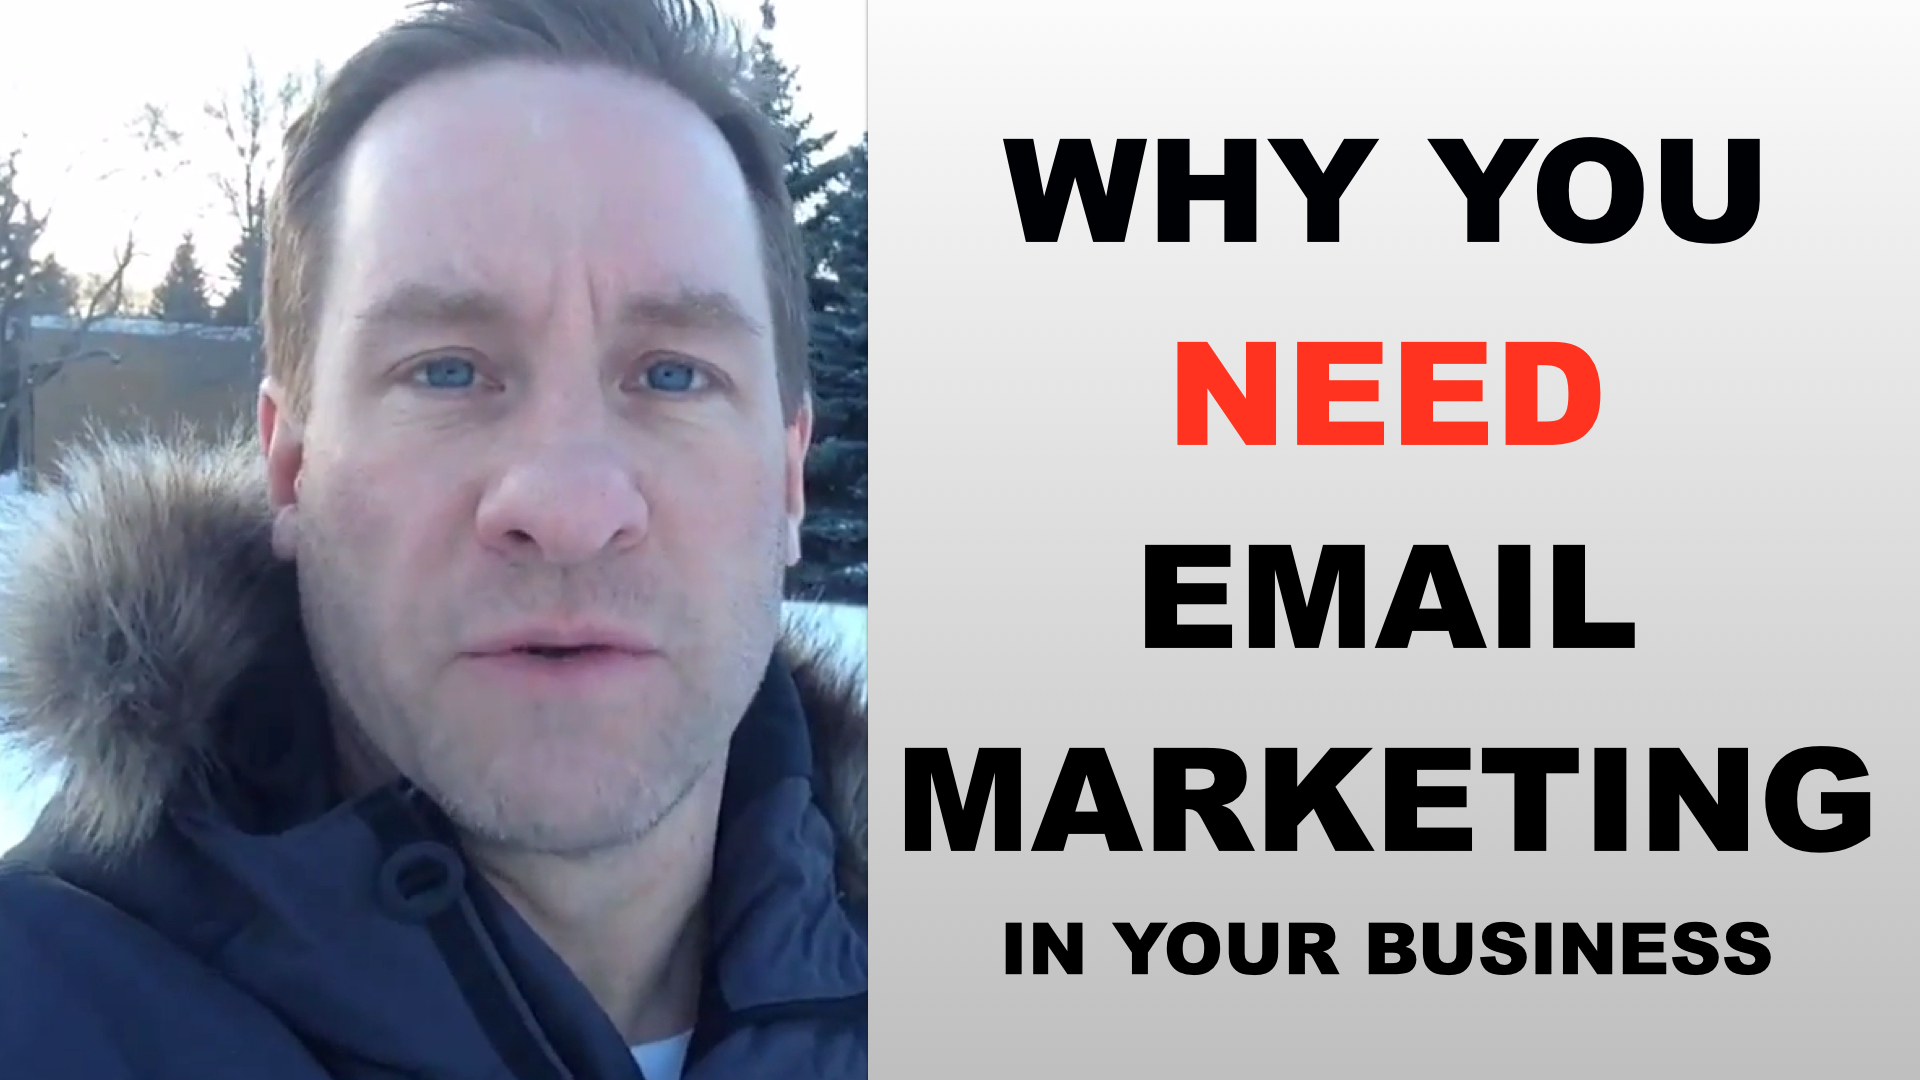 Email Marketing | Why You Need Email Marketing in Your Business